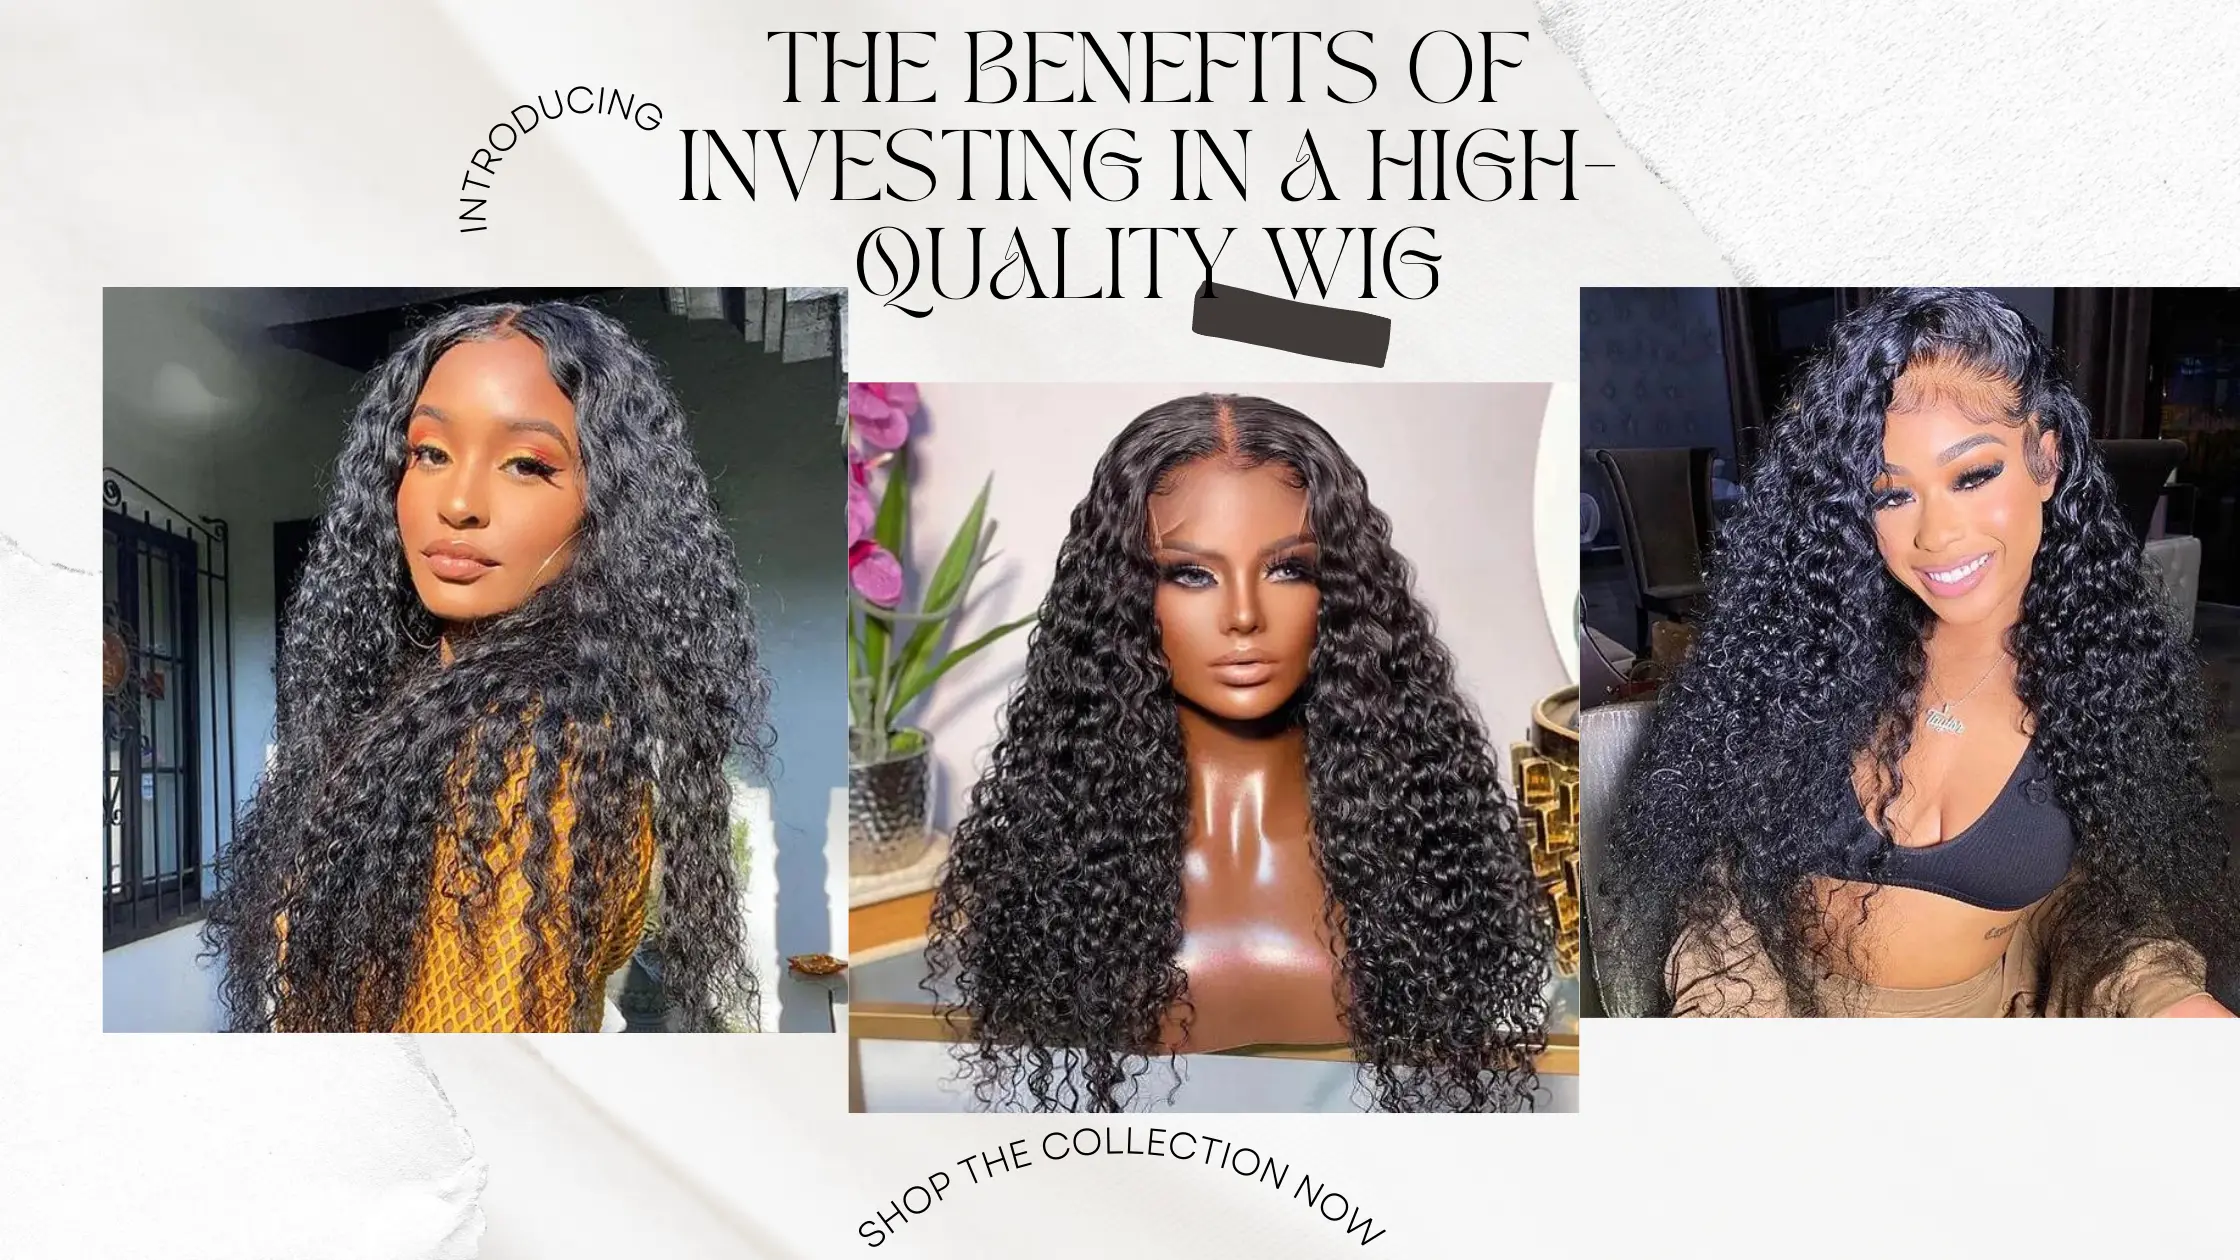 The Benefits of Investing in a High-Quality Wig